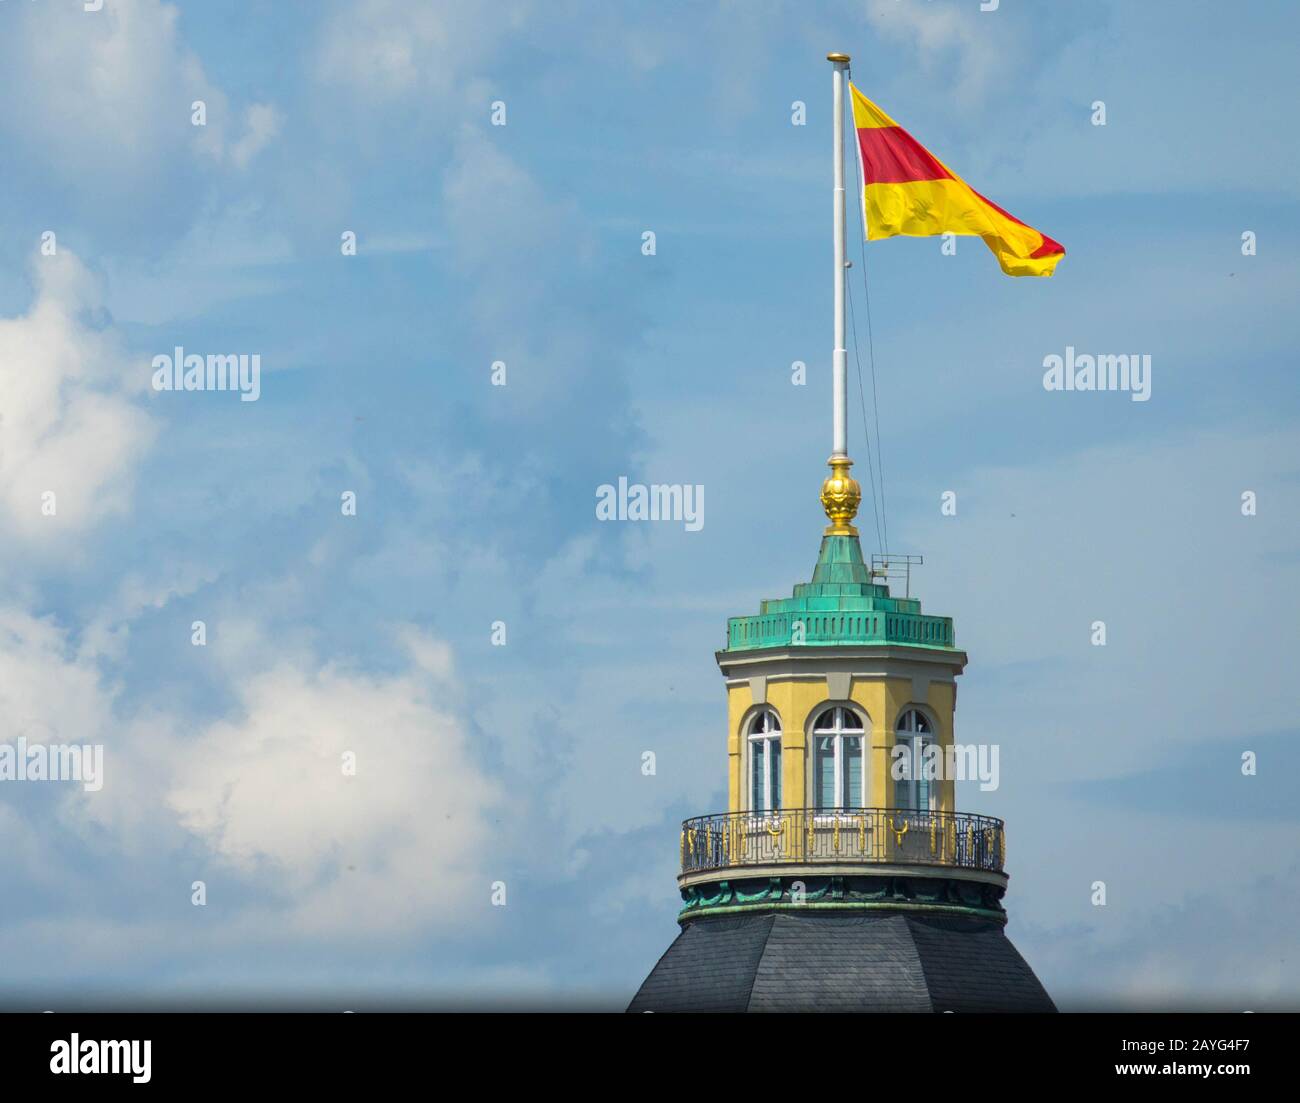 flag on the castle tower, Karlsruhe Germany Stock Photo